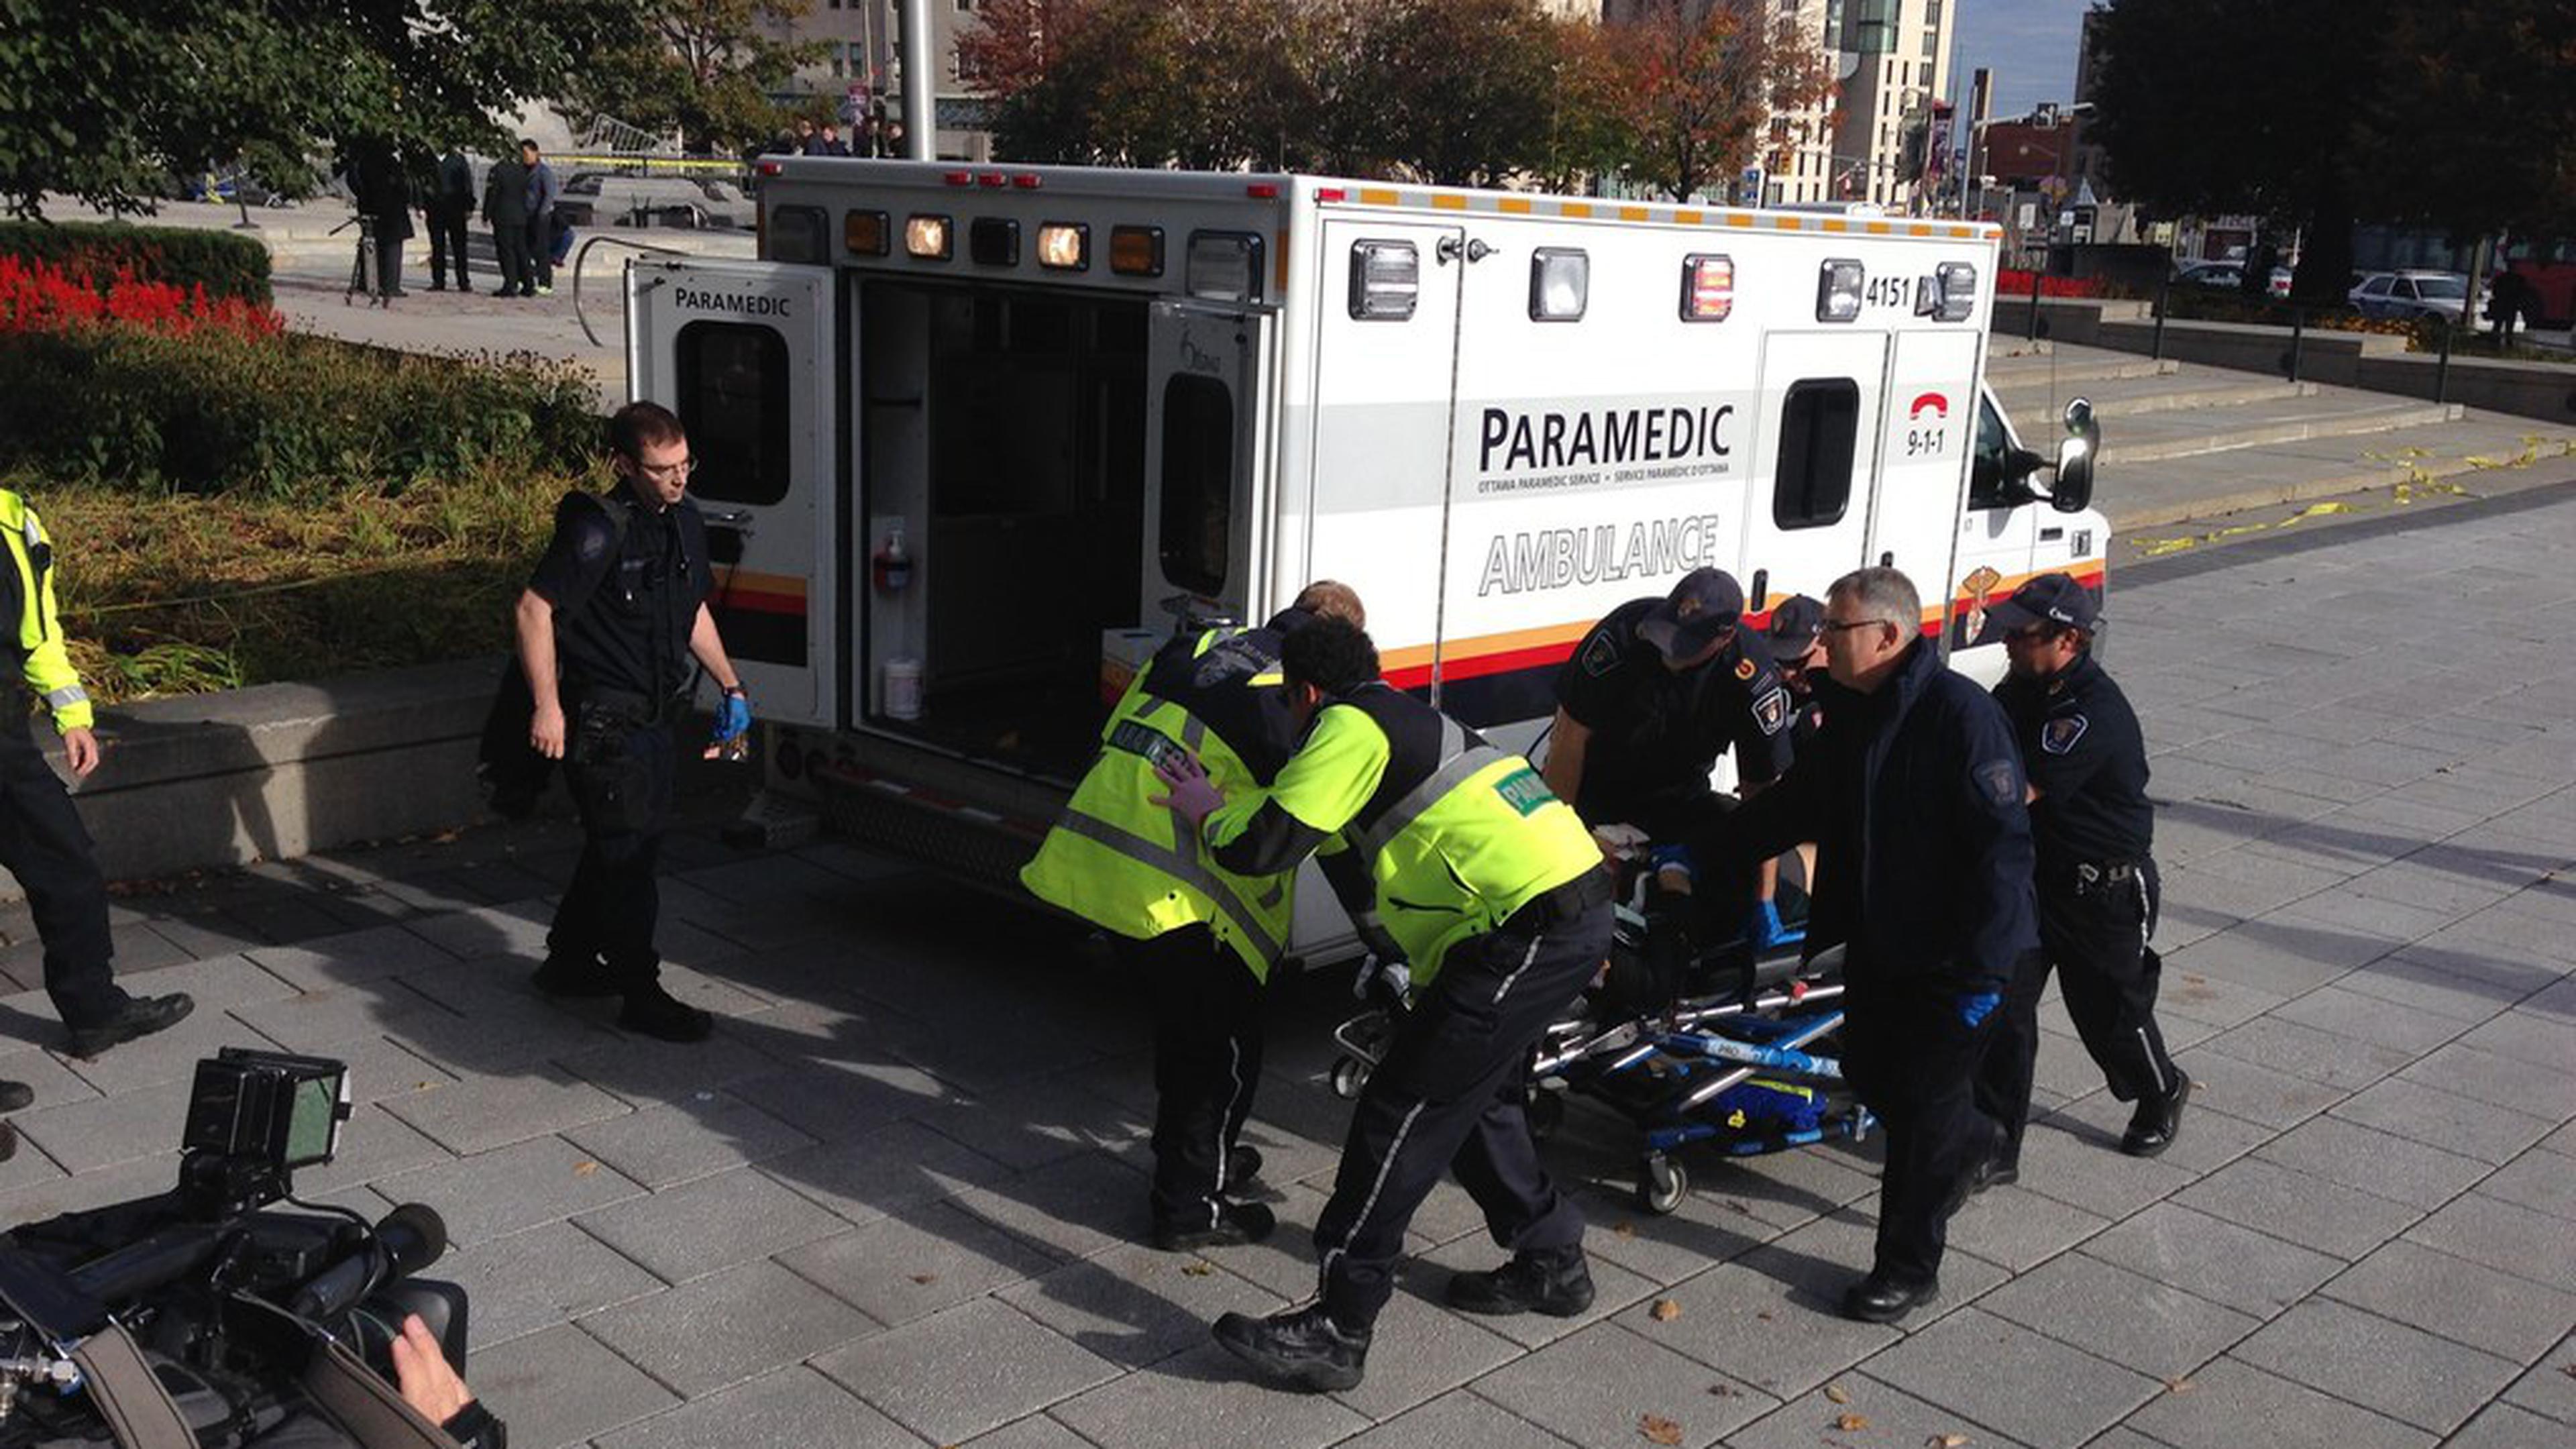 Police and paramedics transport a wounded Canadian soldier on October 22, 2014 in Ottawa, Ontario. Canadian police backed by armored vehicles surrounded parliament in Ottawa on Wednesday after a soldier was shot while guarding a nearby monument. Witnesses said they saw a gunman running to the parliament building after the shooting. Heavily armed police raced to seal off the building and the office of Canadian Prime Minister Stephen Harper. AFP PHOTO/MICHEL COMTE